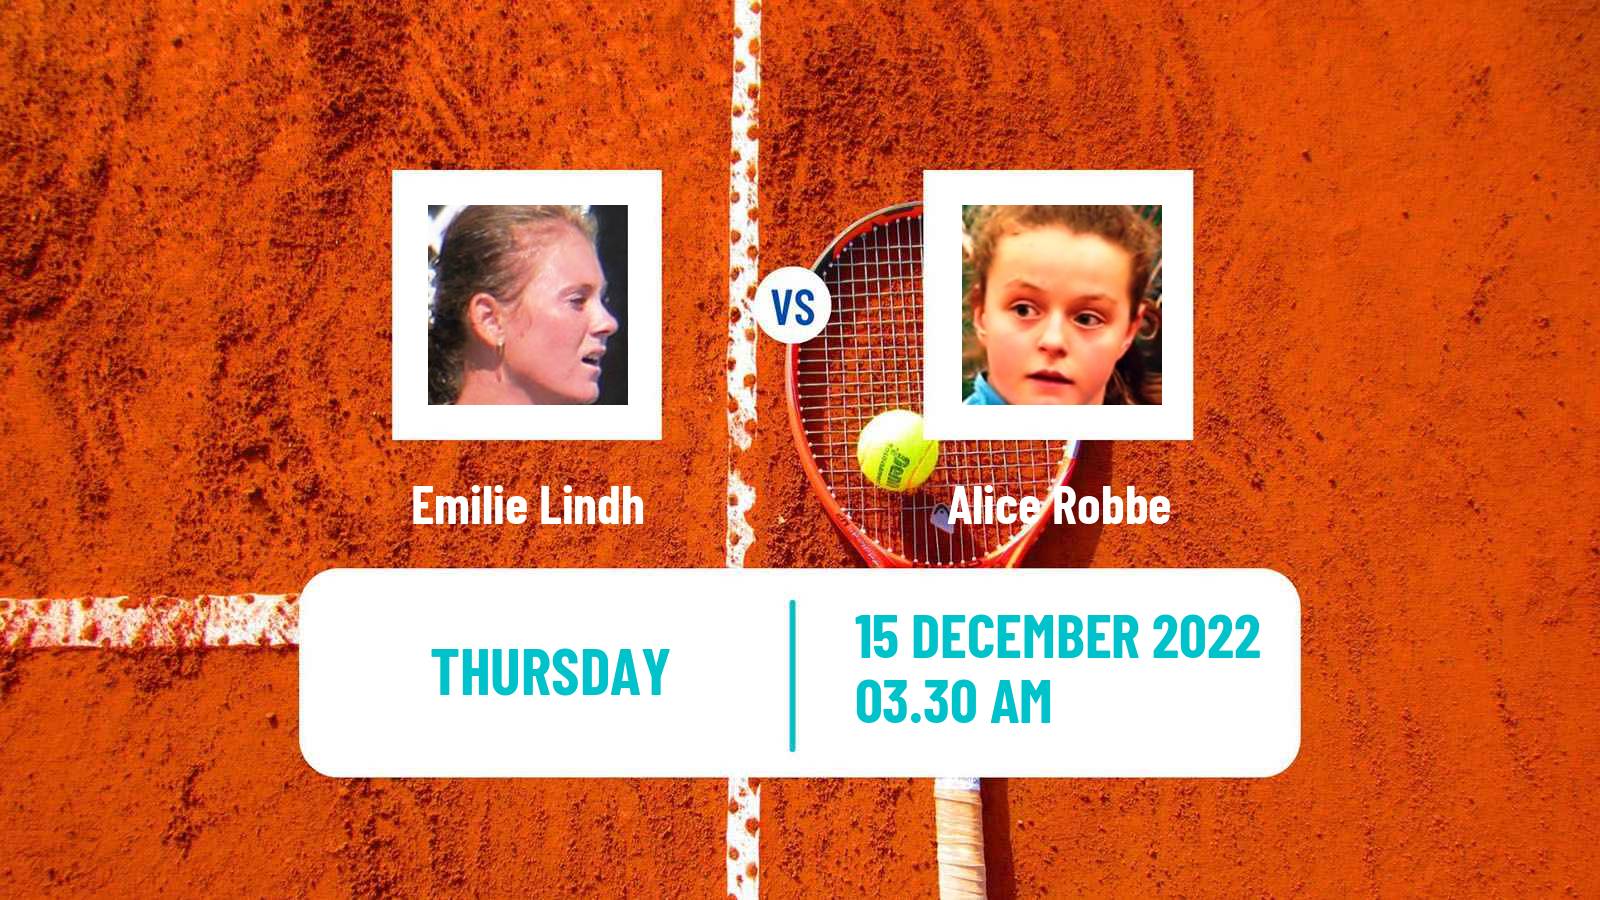 Tennis ITF Tournaments Emilie Lindh - Alice Robbe